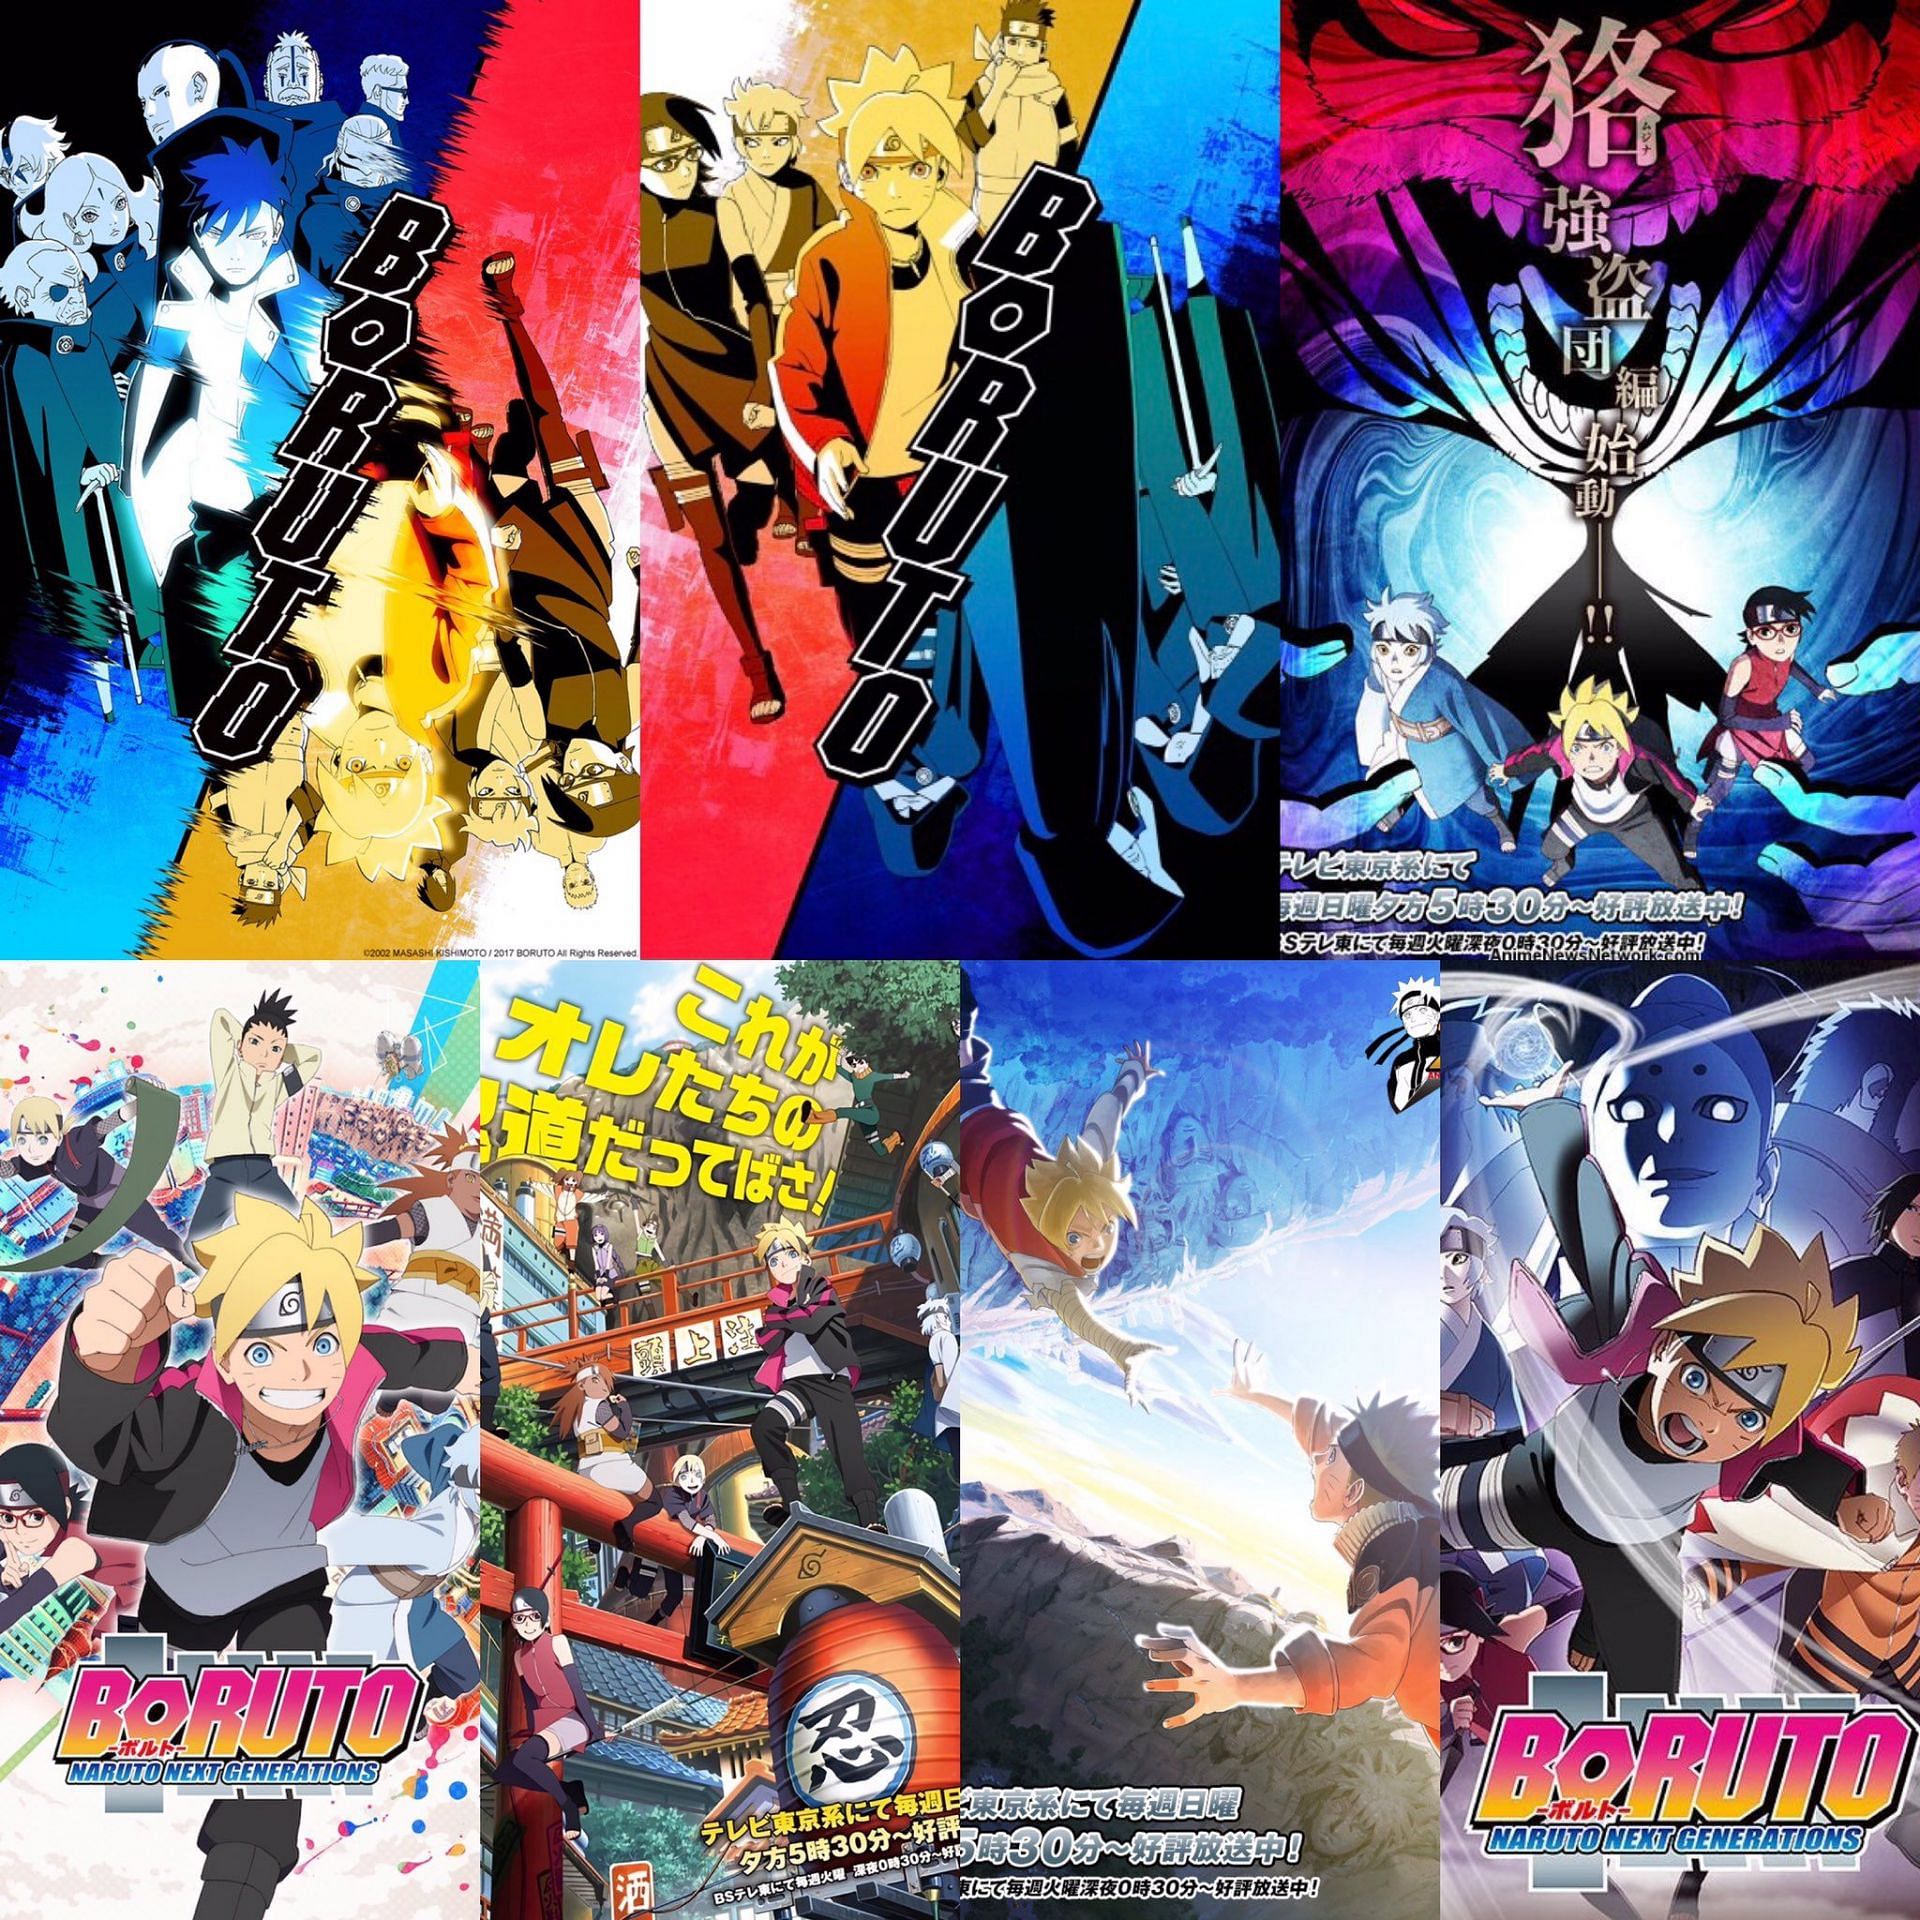 All Boruto Official Posters (credit : Crunchyroll)